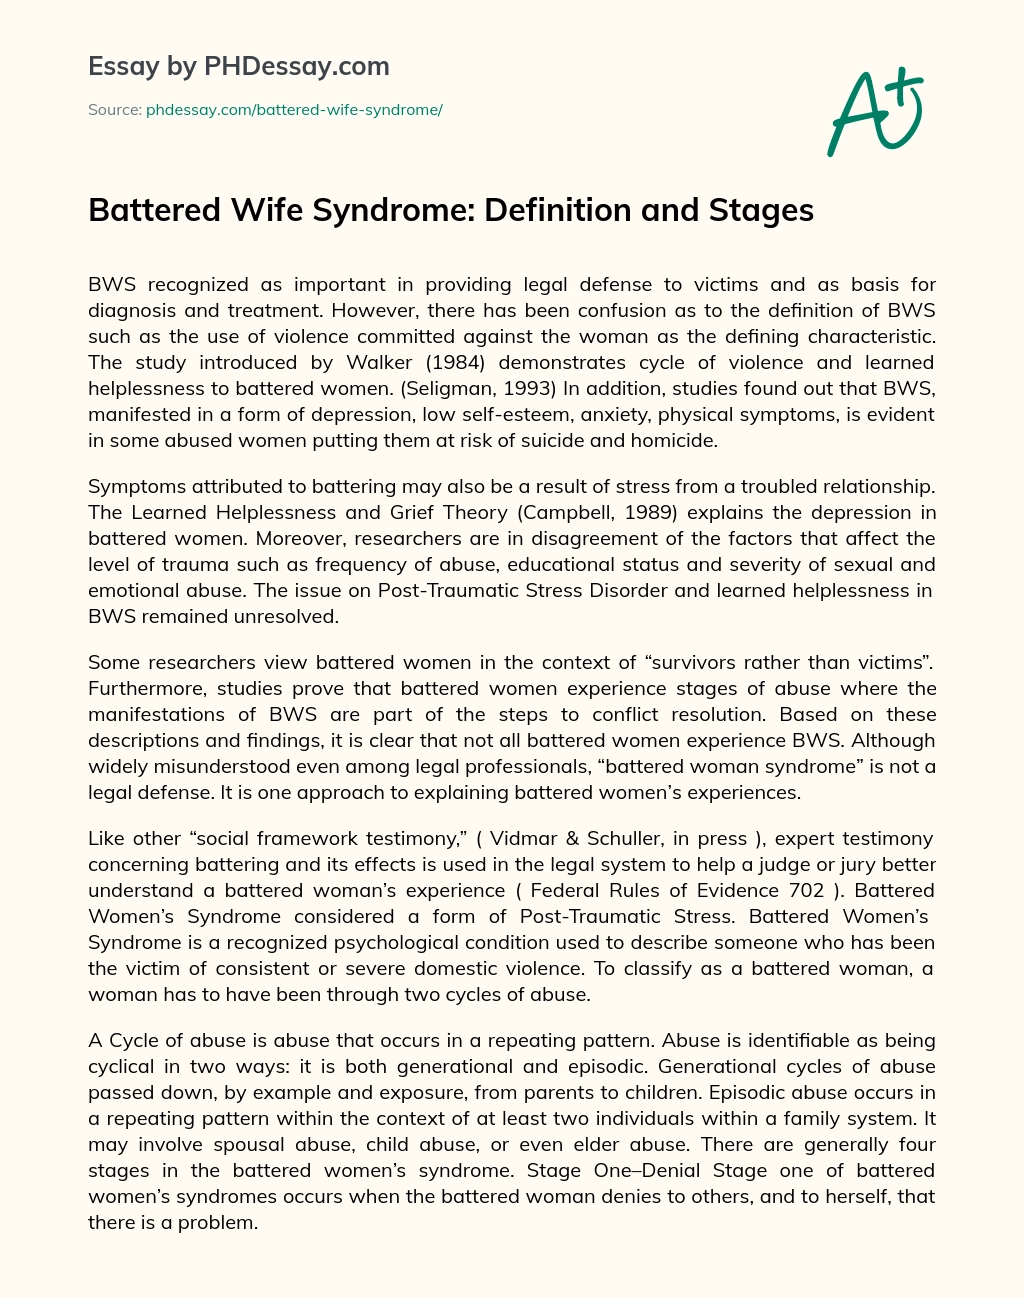 Battered Wife Syndrome: Definition and Stages essay